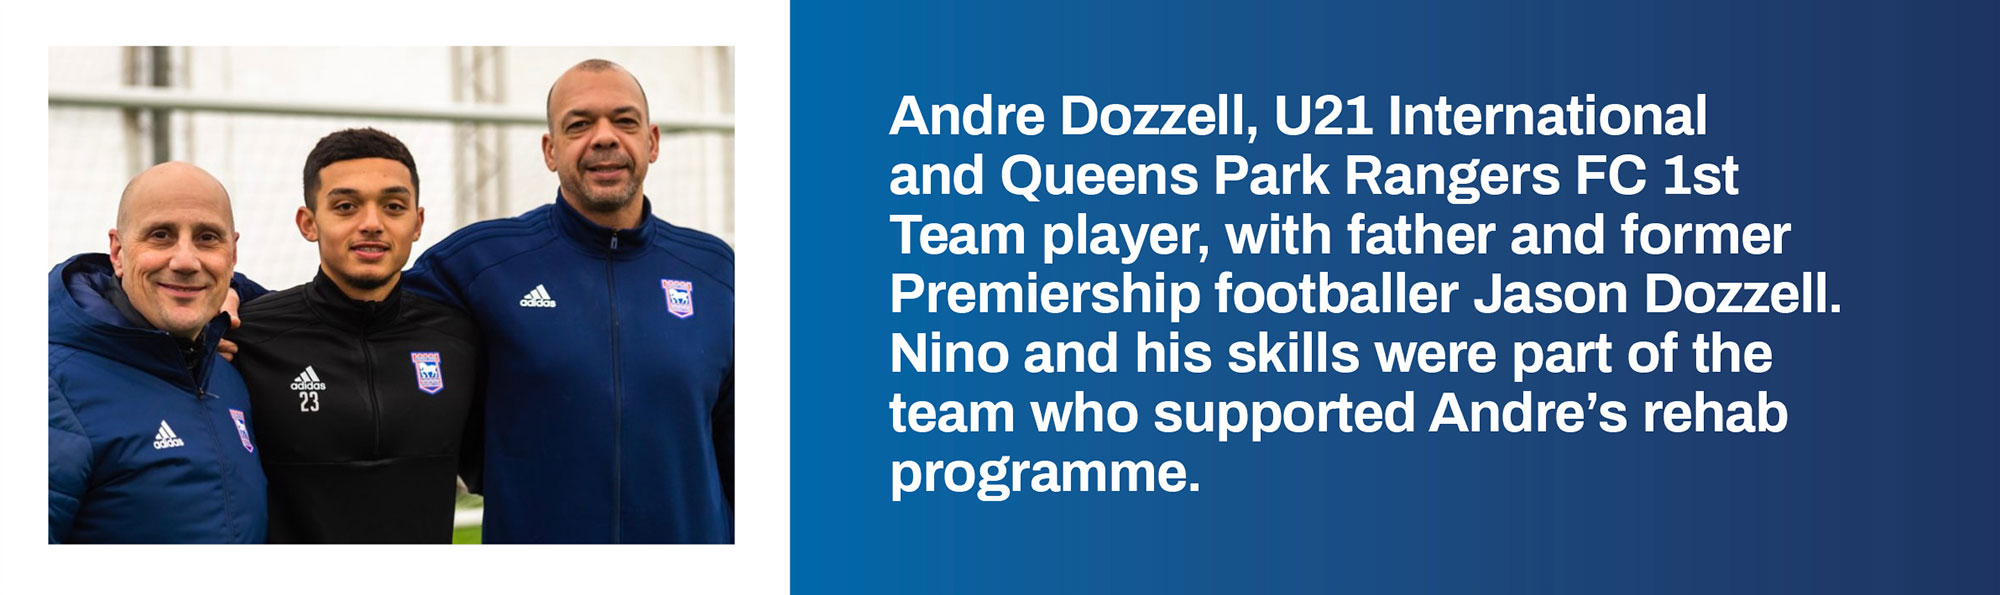 Andre Dozzell, U21 International and Queens Park Rangers FC 1st Team player